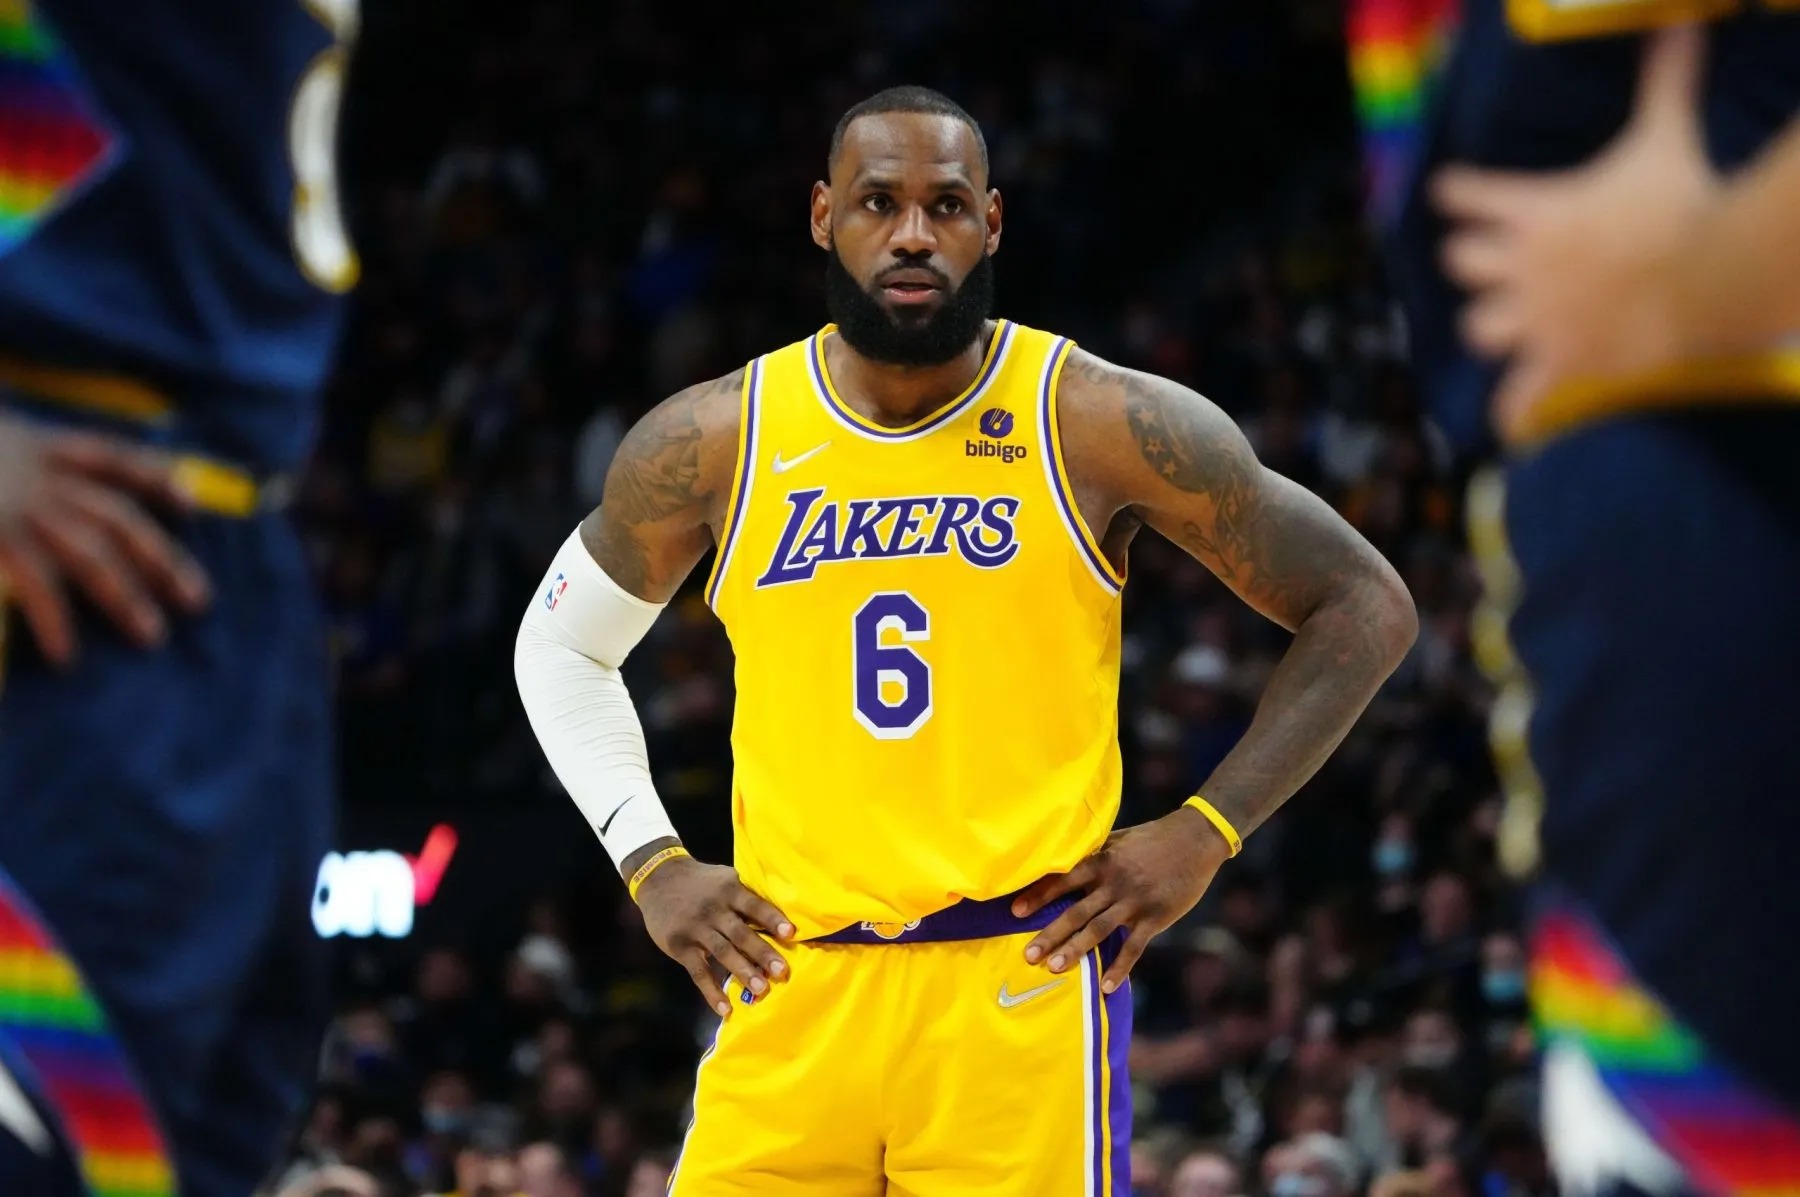 LeBron James' heated two-word response to Dillon Brooks' question following Lakers-Rockets brawl